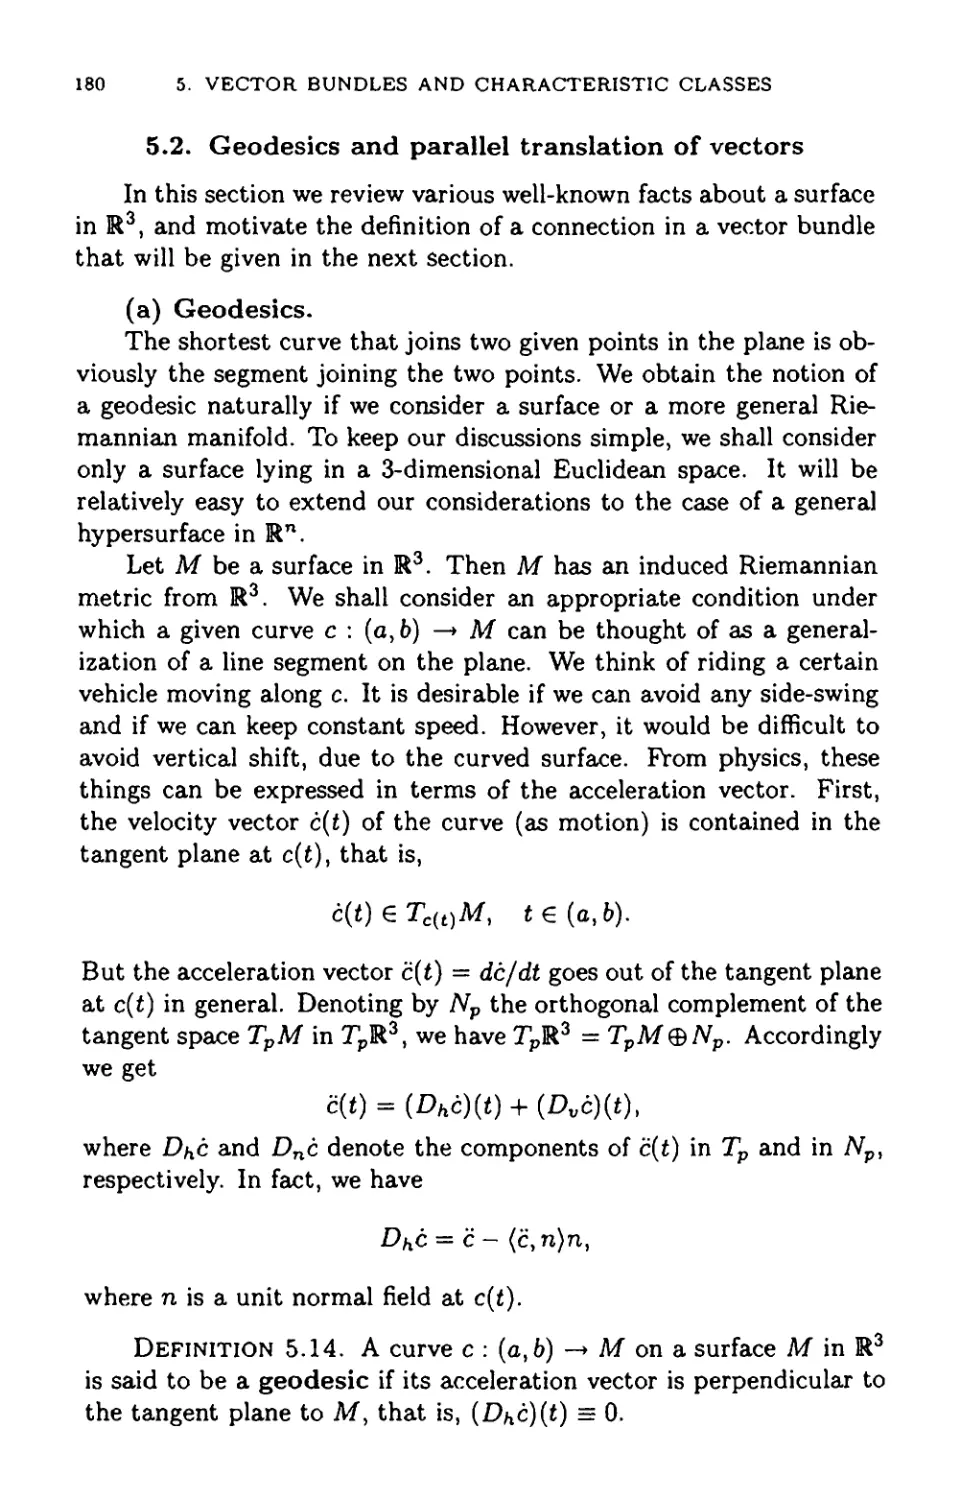 5.2 Geodesics and parallel translation of vectors